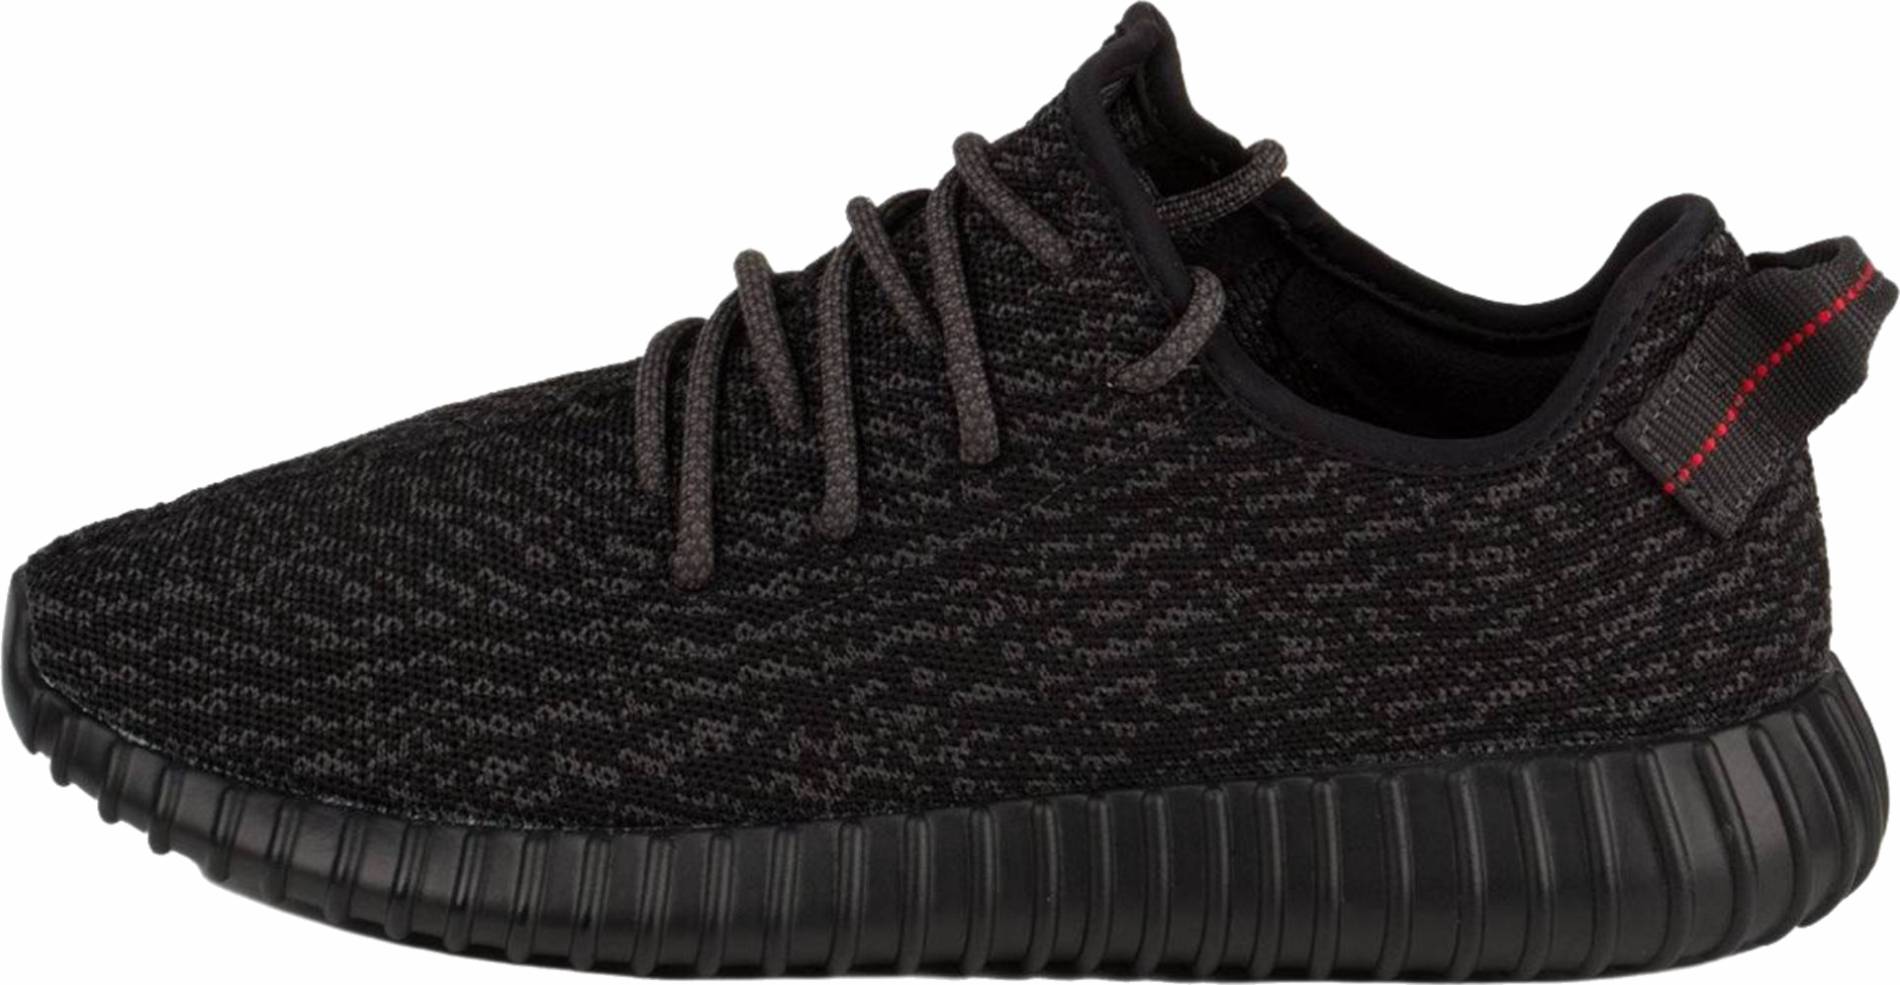 $306 + Review of Adidas Yeezy 350 Boost 